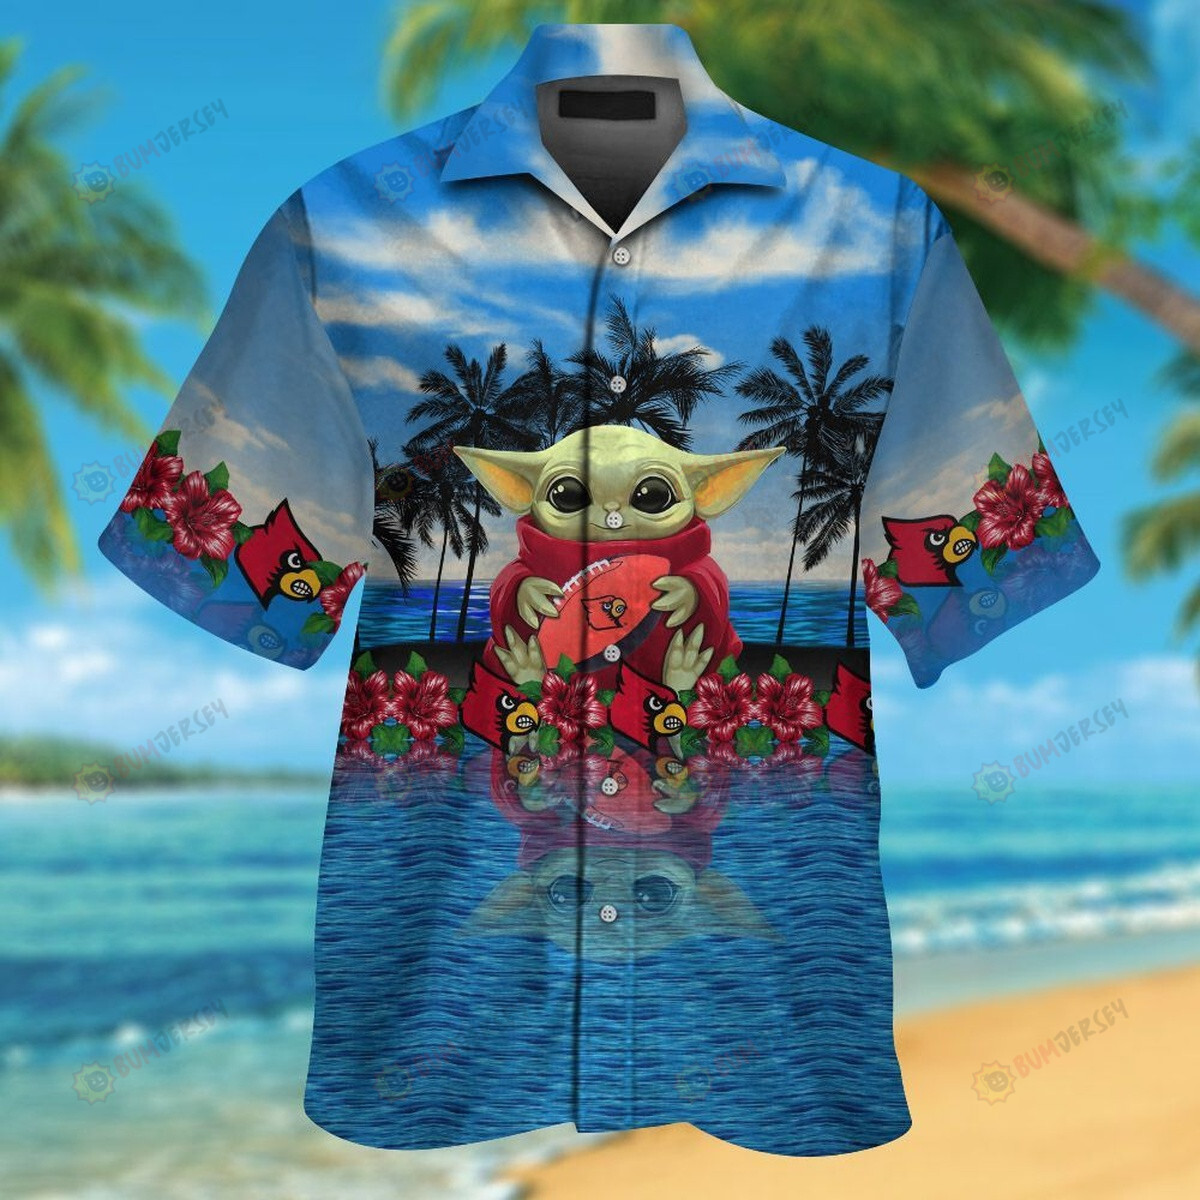 Louisville Cardinals And Baby Yoda Blue and Red Short Sleeve Button Up 3D Printed Hawaiian Shirt